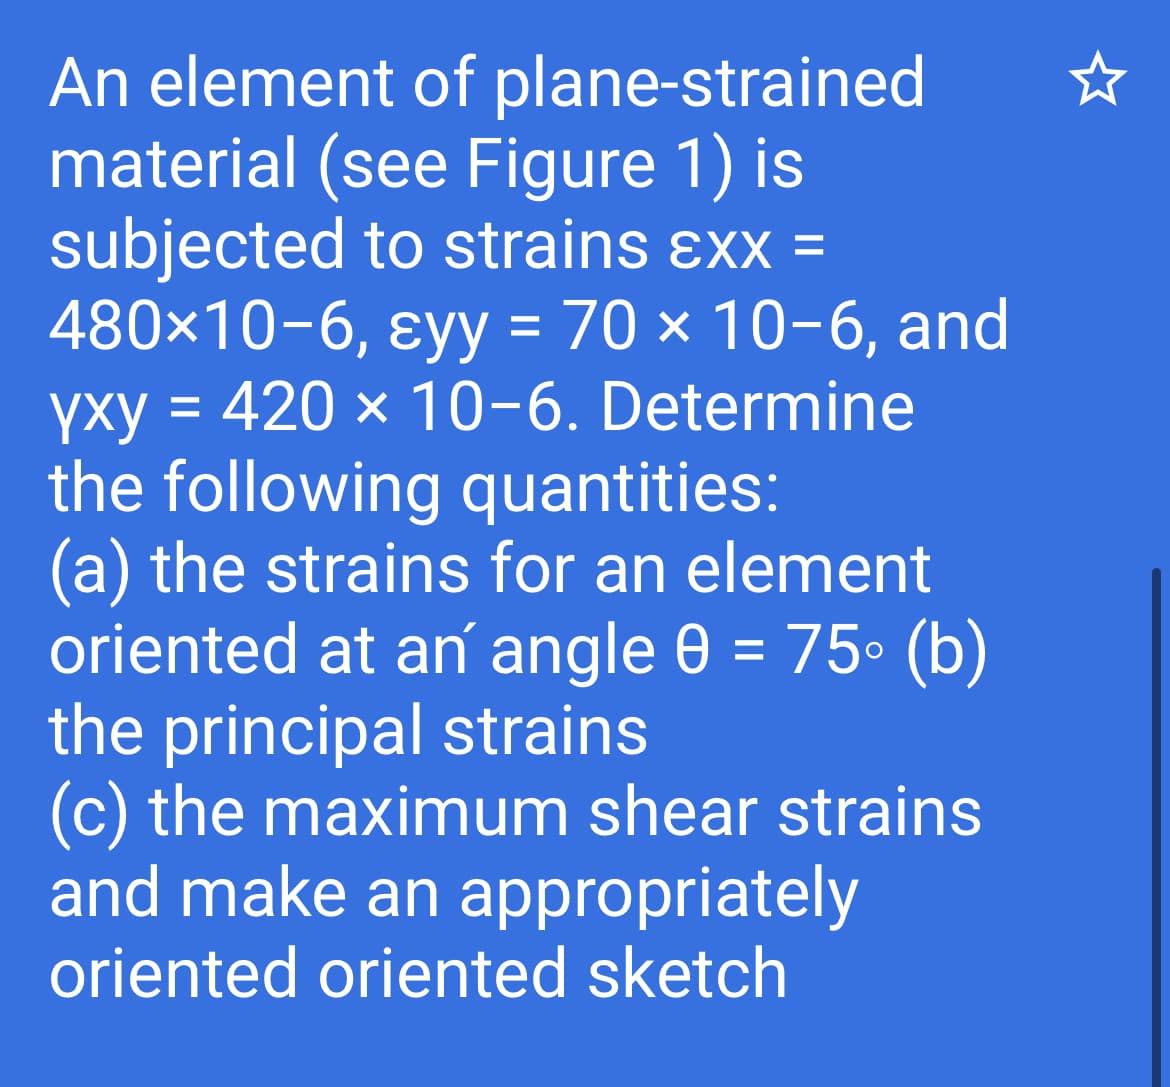 An element of plane-strained
material (see Figure 1) is
subjected to strains ɛxx =
480×10-6, ɛyy = 70 × 10-6, and
yxy = 420 × 10-6. Determine
the following quantities:
(a) the strains for an element
oriented at an angle 0 = 75° (b)
the principal strains
(c) the maximum shear strains
and make an appropriately
%3D
%3D
oriented oriented sketch
